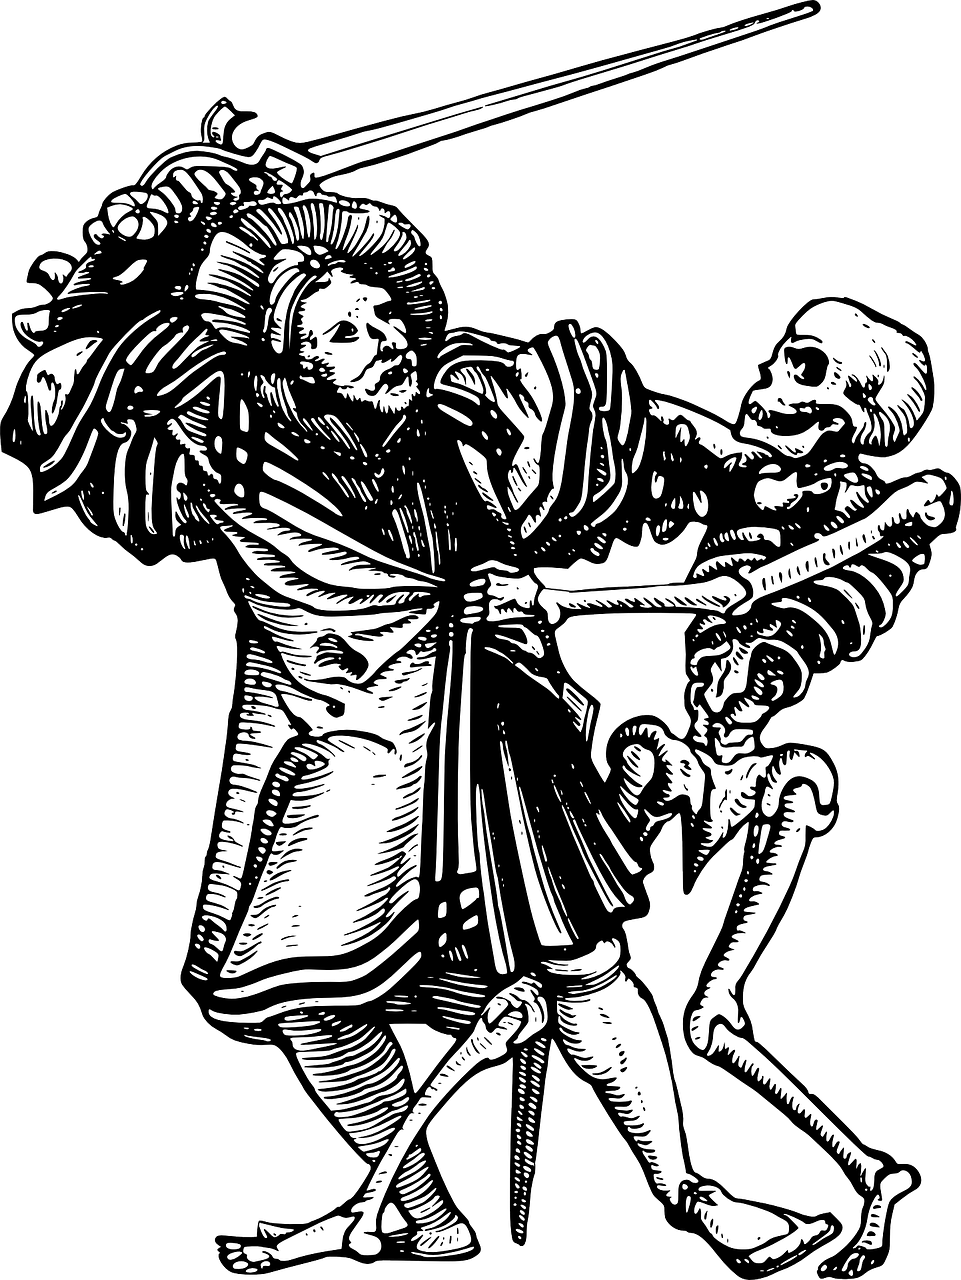 a couple of skeletons standing next to each other, a woodcut, sots art, dancing a jig, the harbringer of death, black-and-white, renaissance era